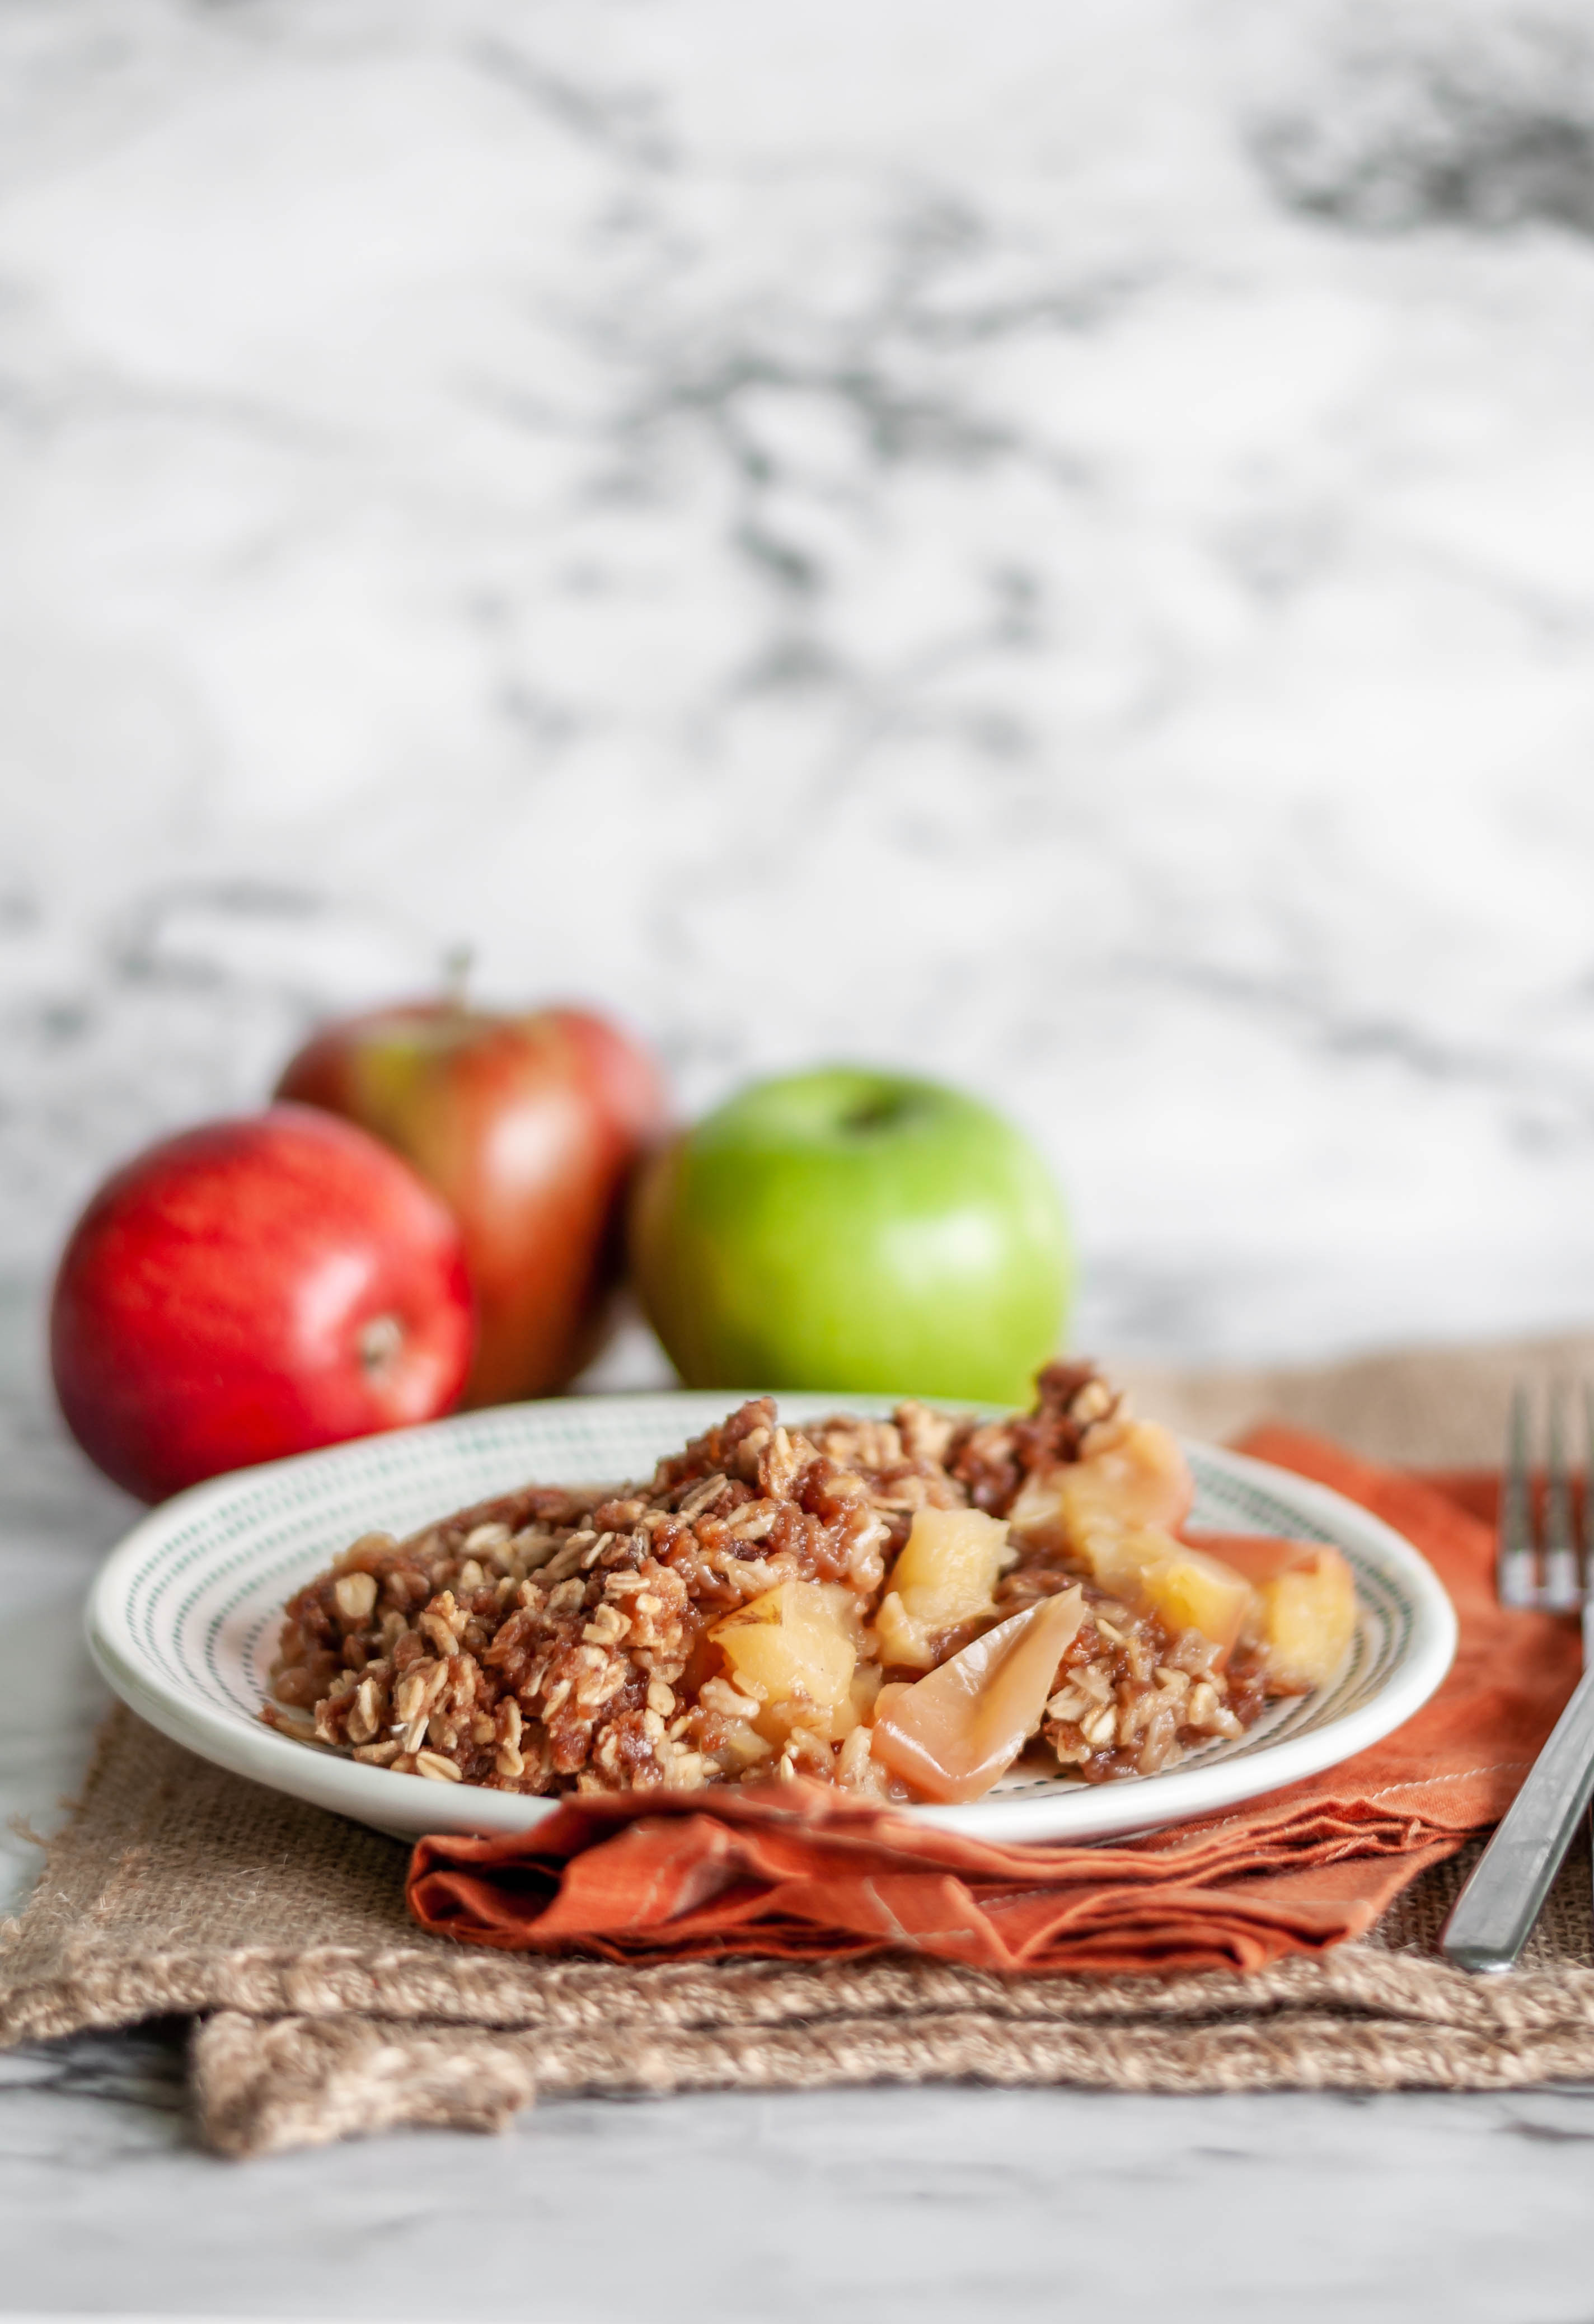 Instant Pot Apple Crisp is the perfect way to celebrate fall. Only 5 minutes to cook in the Instant Pot. Check out my guide to the Best Apples for Baking.